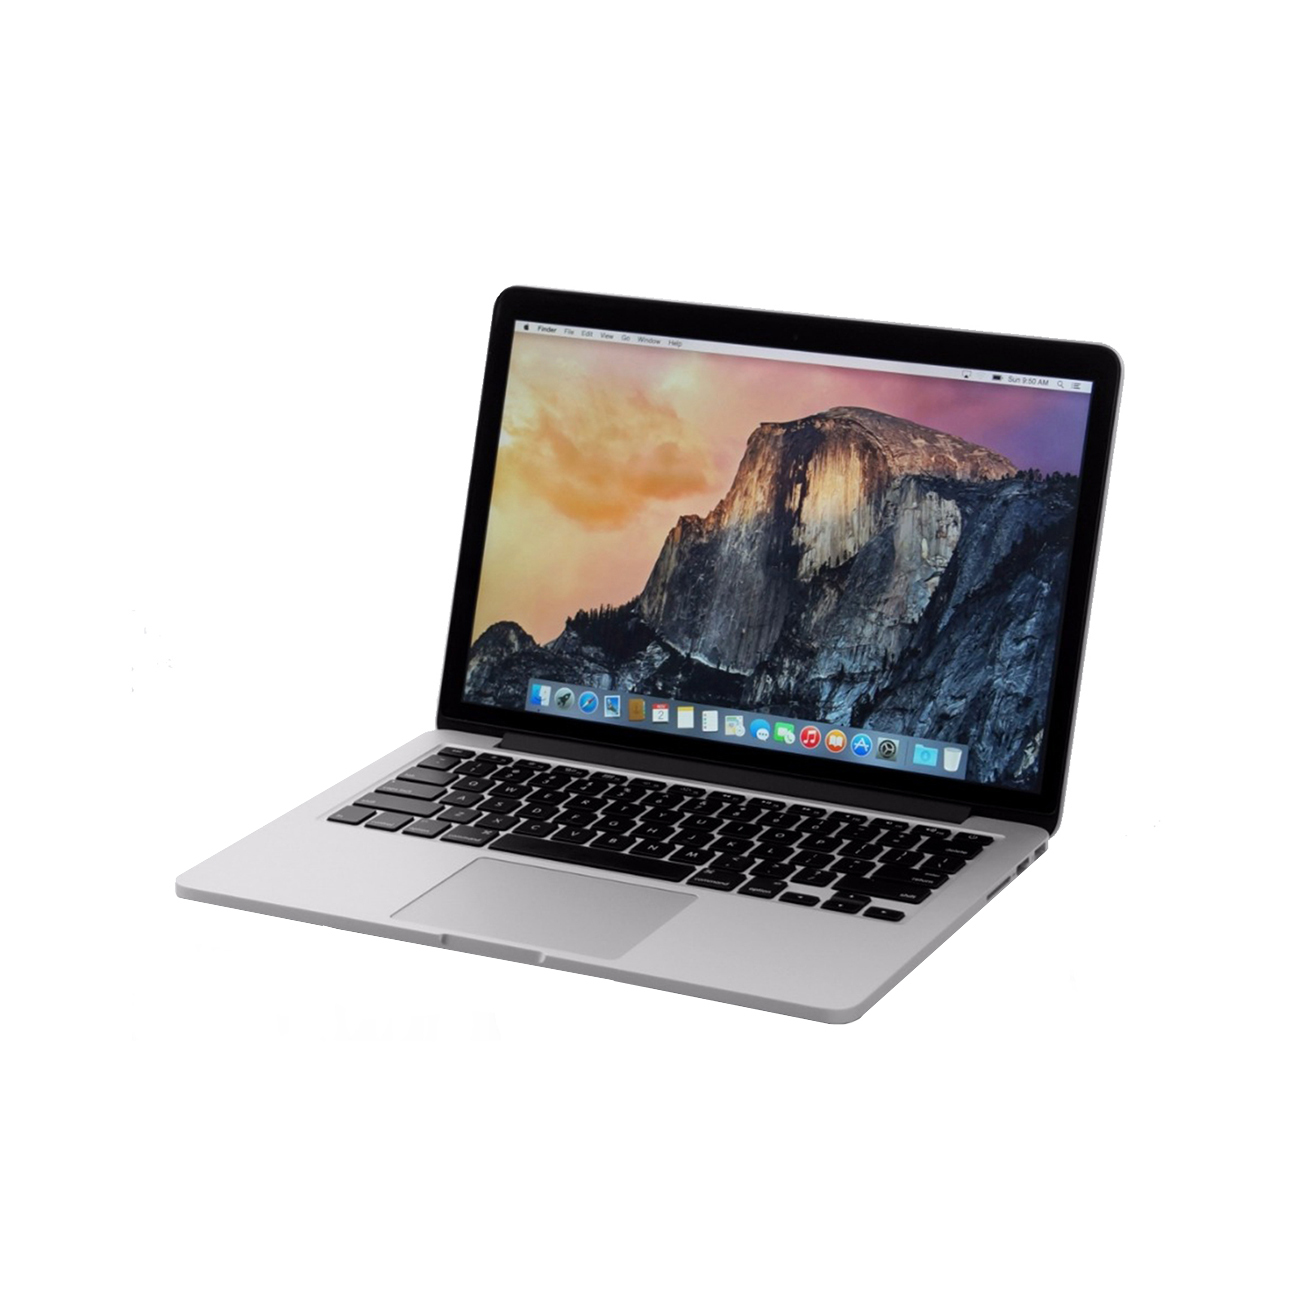 macbook pro late 2013 for sale